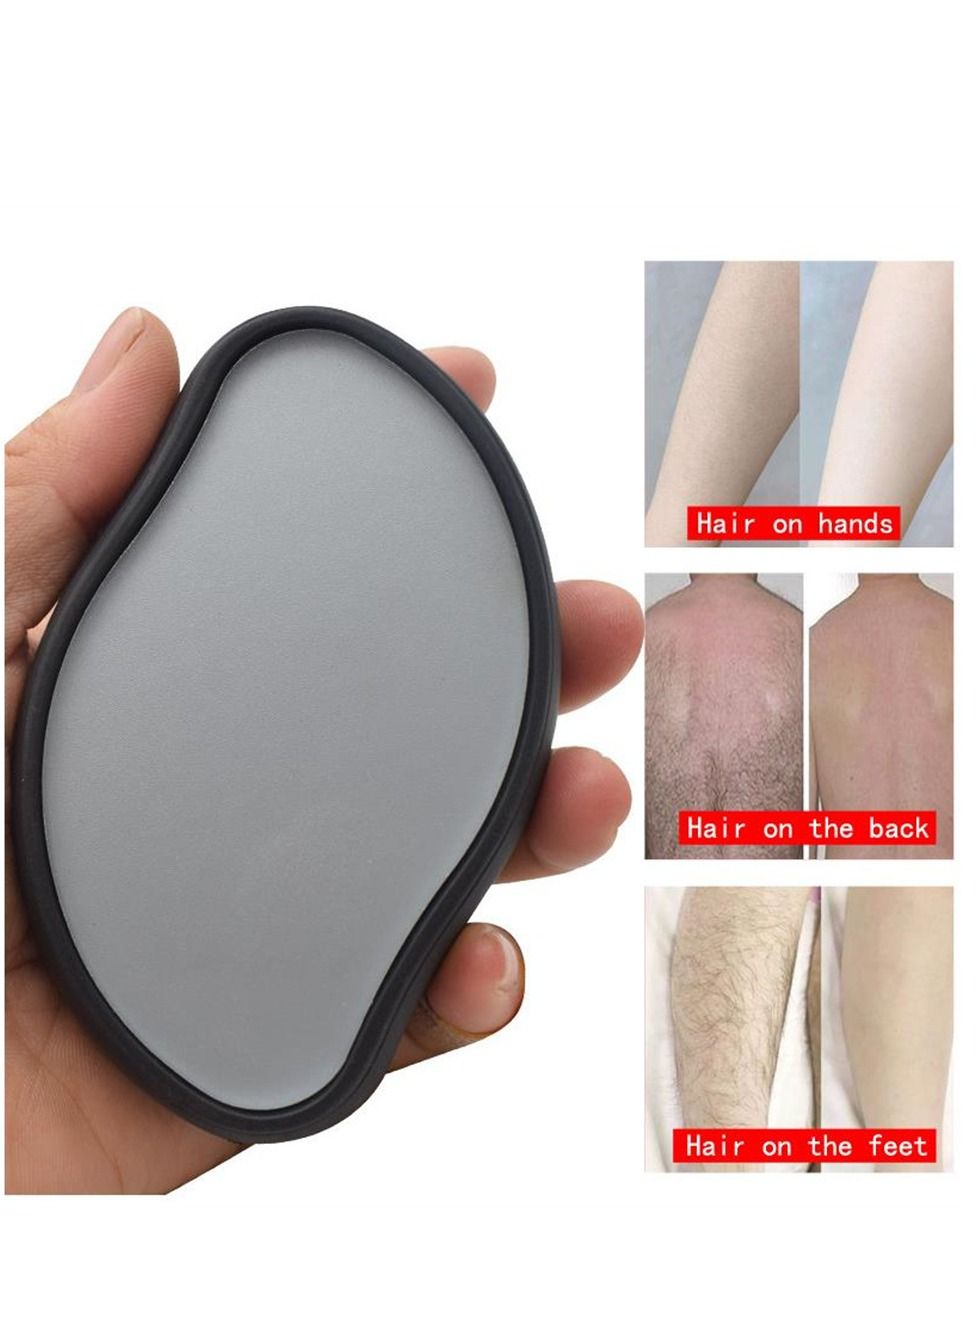 Physical Hair Removal Glass Hair Removal Tool for Men and Women